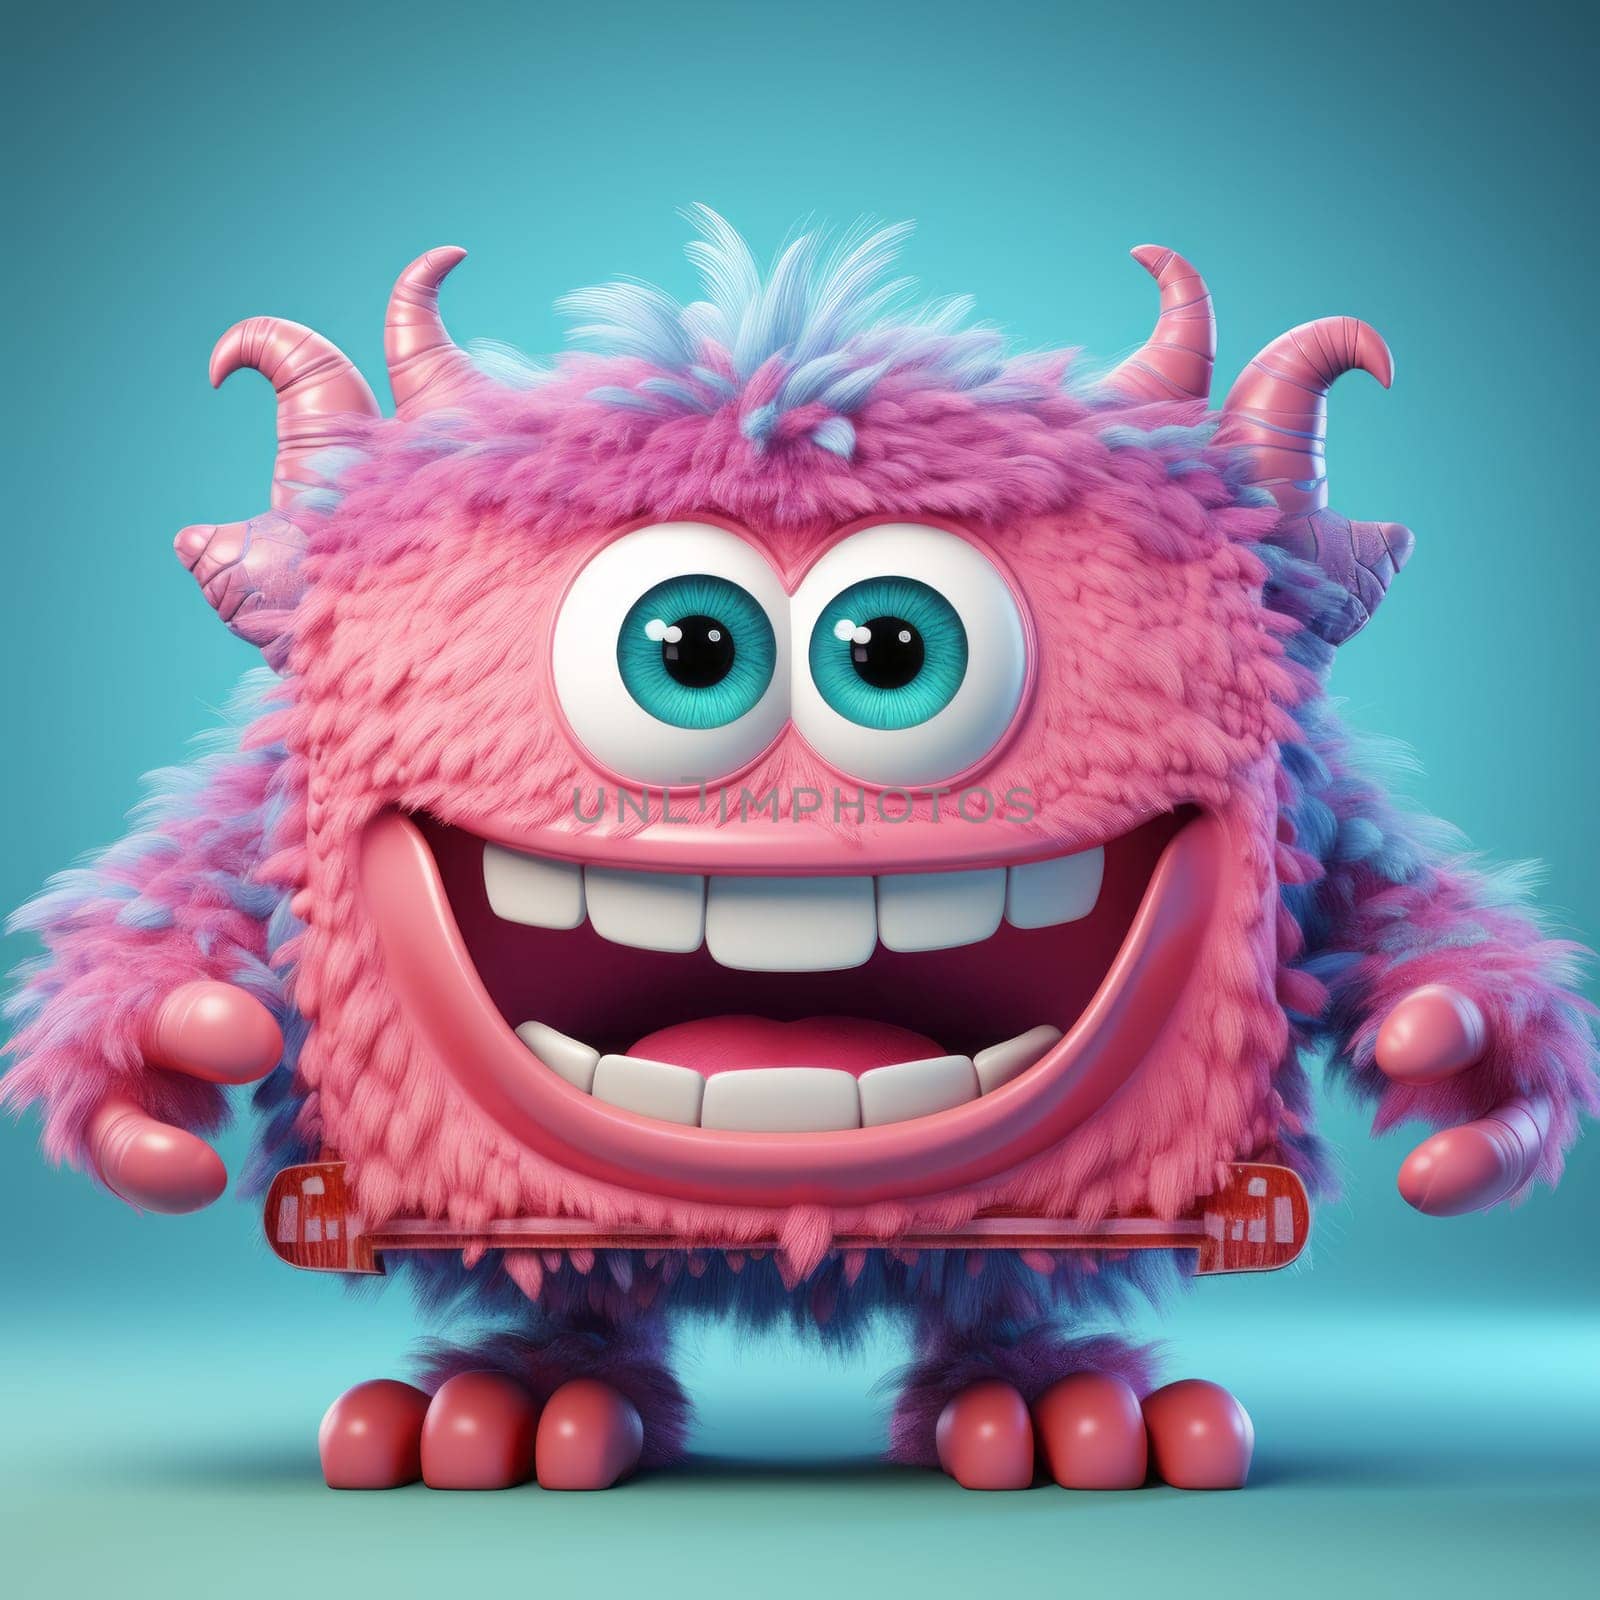 A fluffy pink monster with large blue eyes and horns, grinning on a teal background by Zakharova